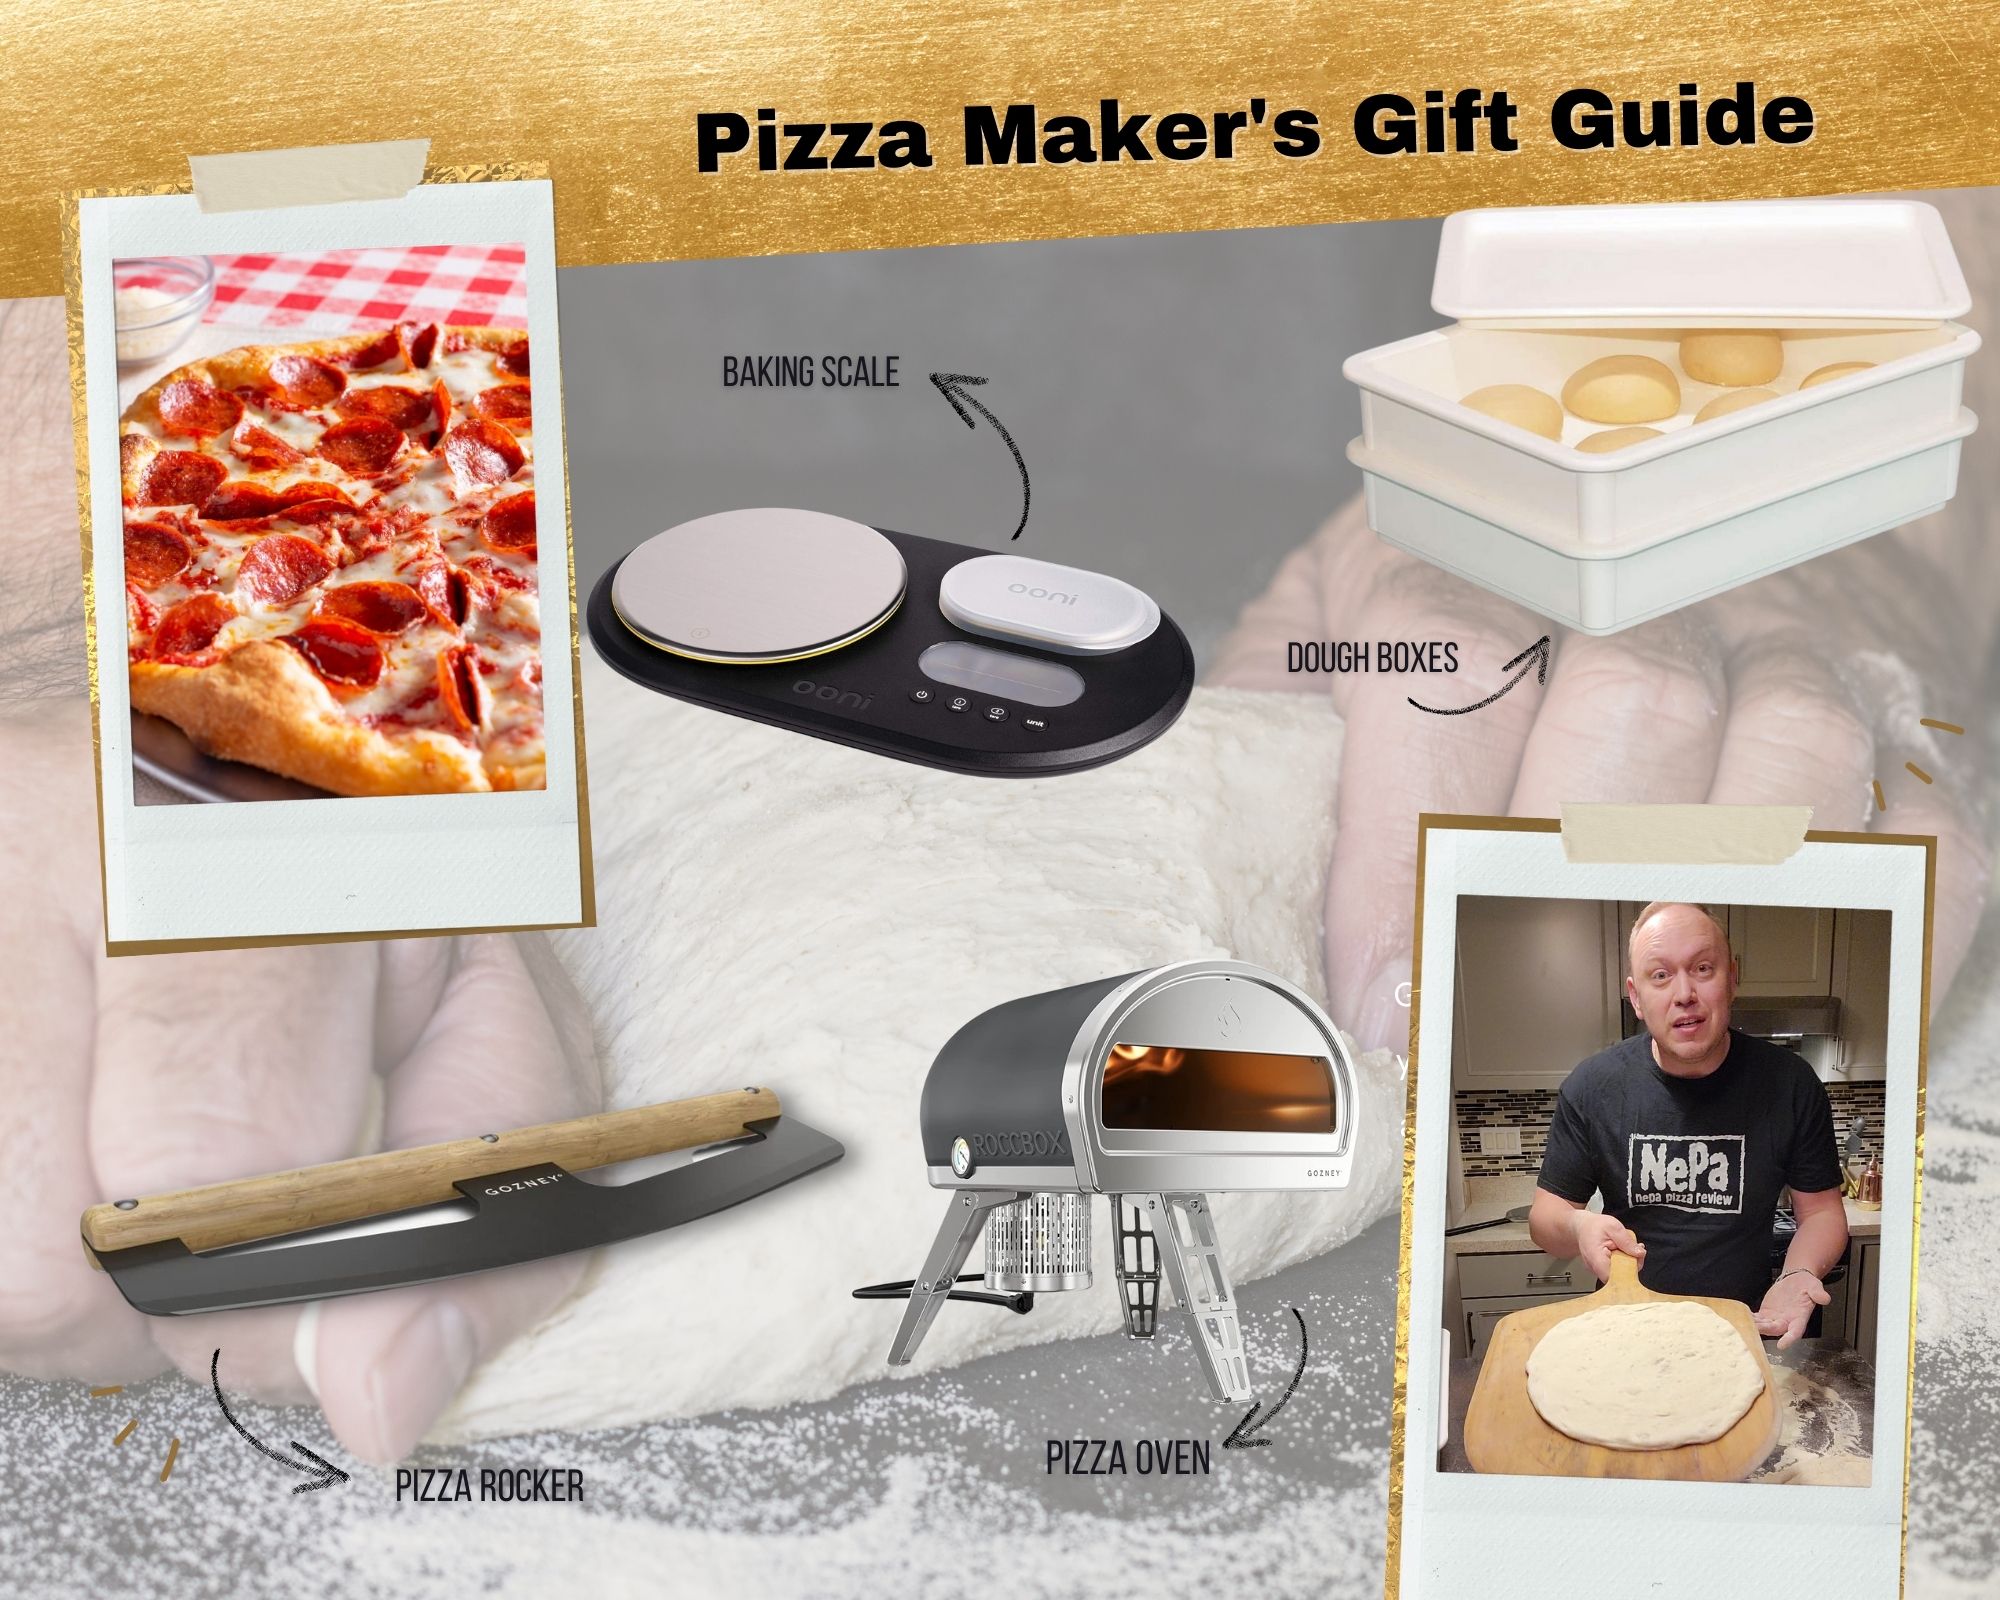 https://nepapizzareview.com/wp-content/uploads/2022/11/Ultimate-Gift-Guide-for-the-Home-Pizza-Maker-1.jpg